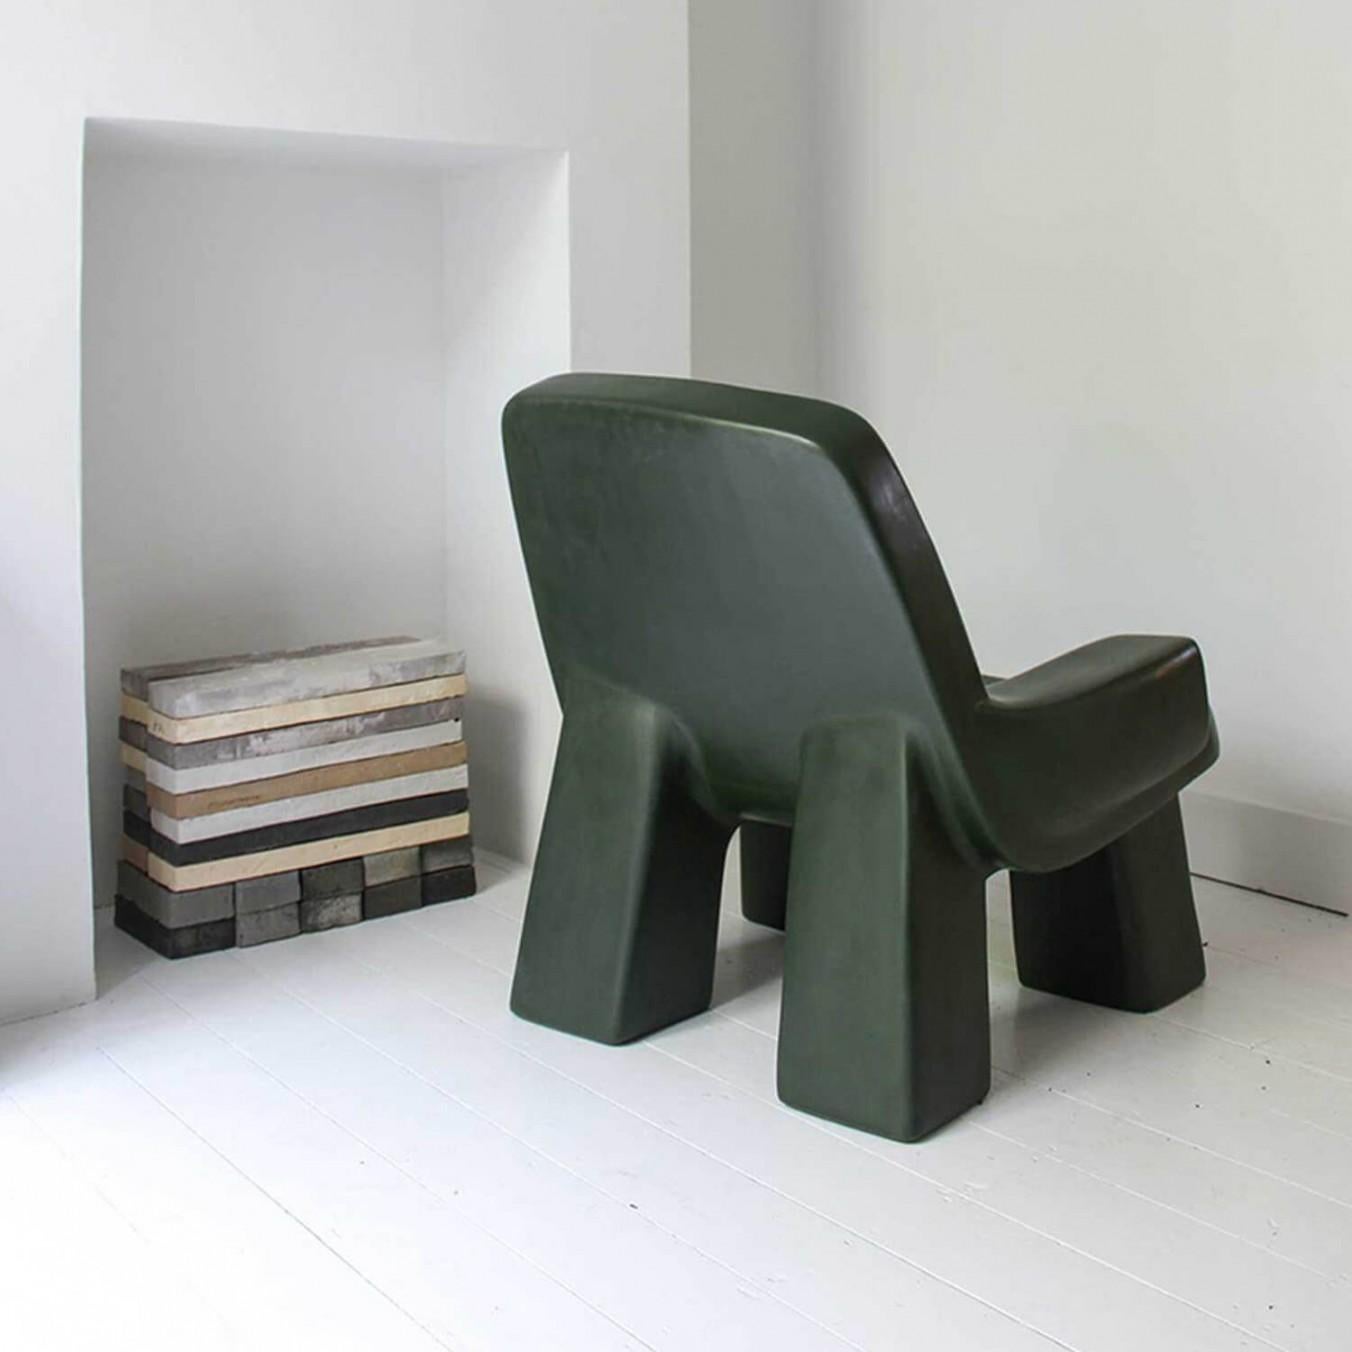 Contemporary fiberglass armchair - Fudge Chair by Faye Toogood. This is shown in the charcoal opaque fiberglass finish. 
Design: Faye Toogood
Material: fiberglass 
Available also in cream, malachite or mallow opaque finish.

Faye Toogood’s new